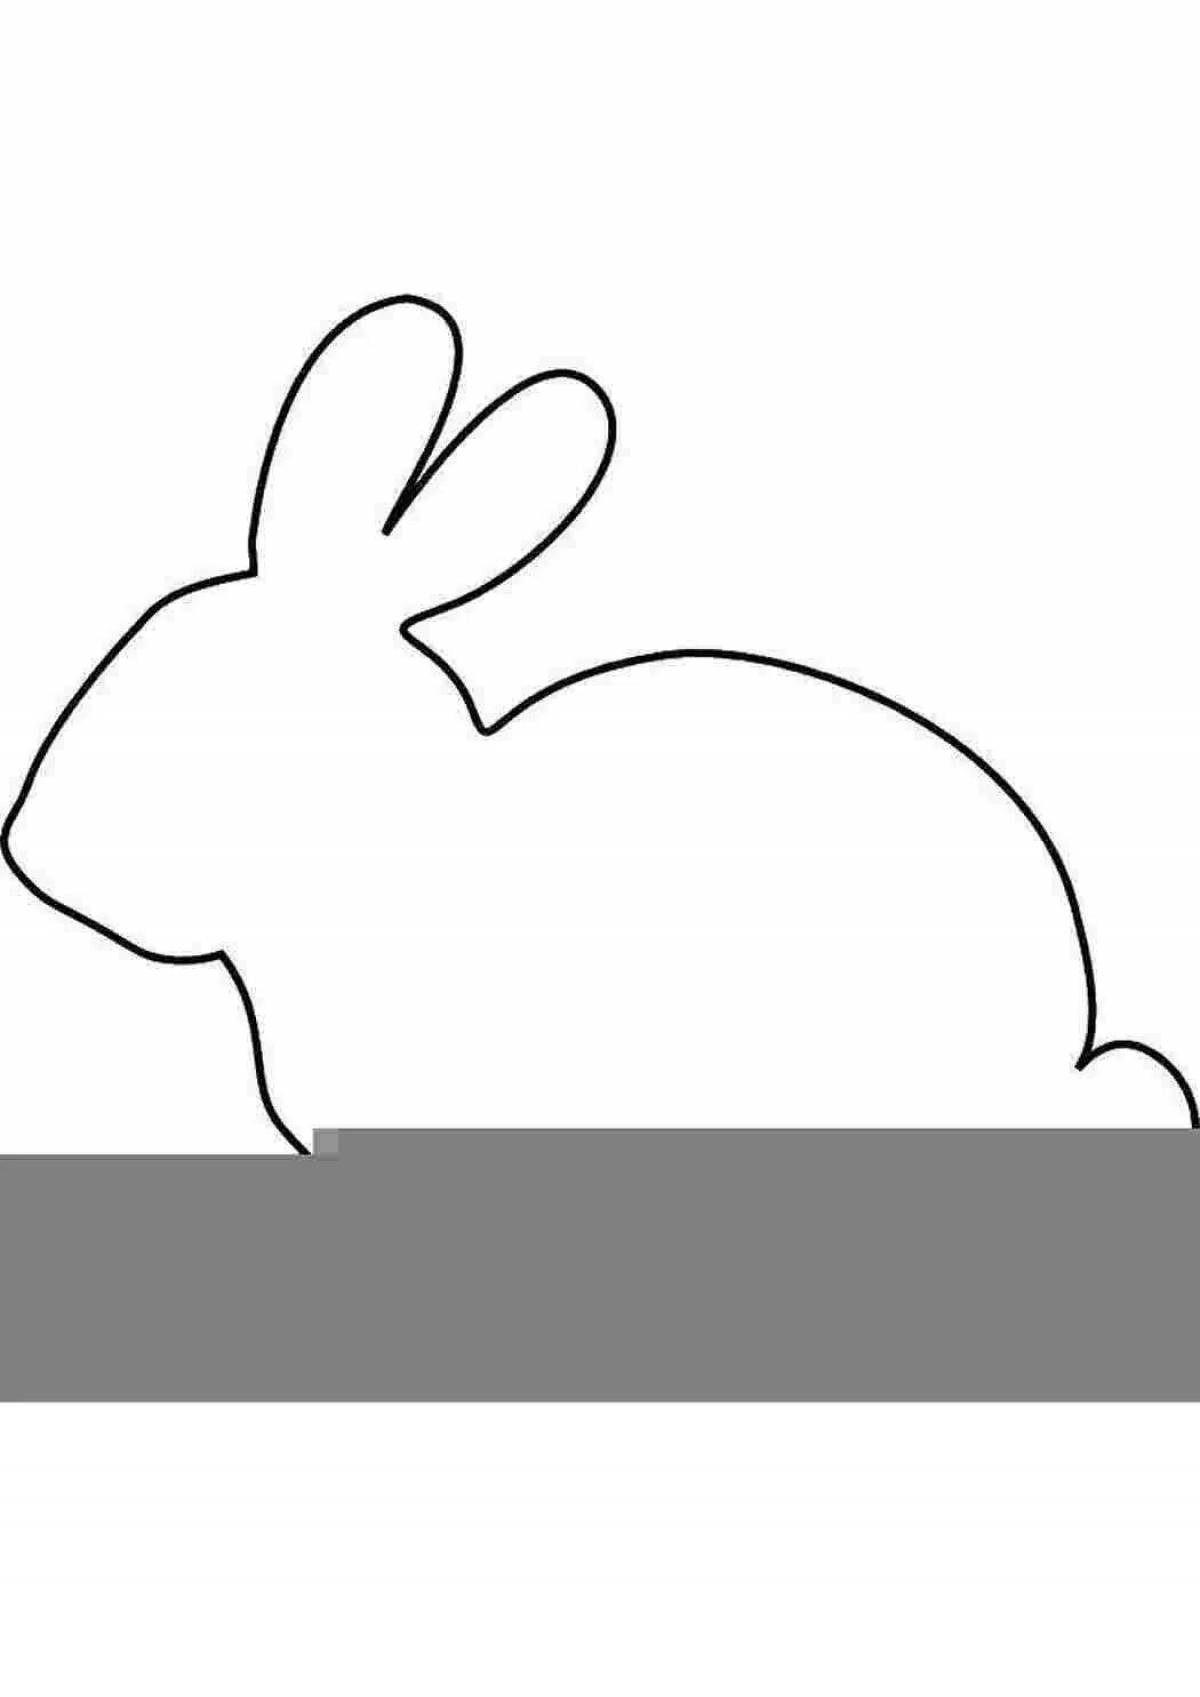 Bright coloring hare outline